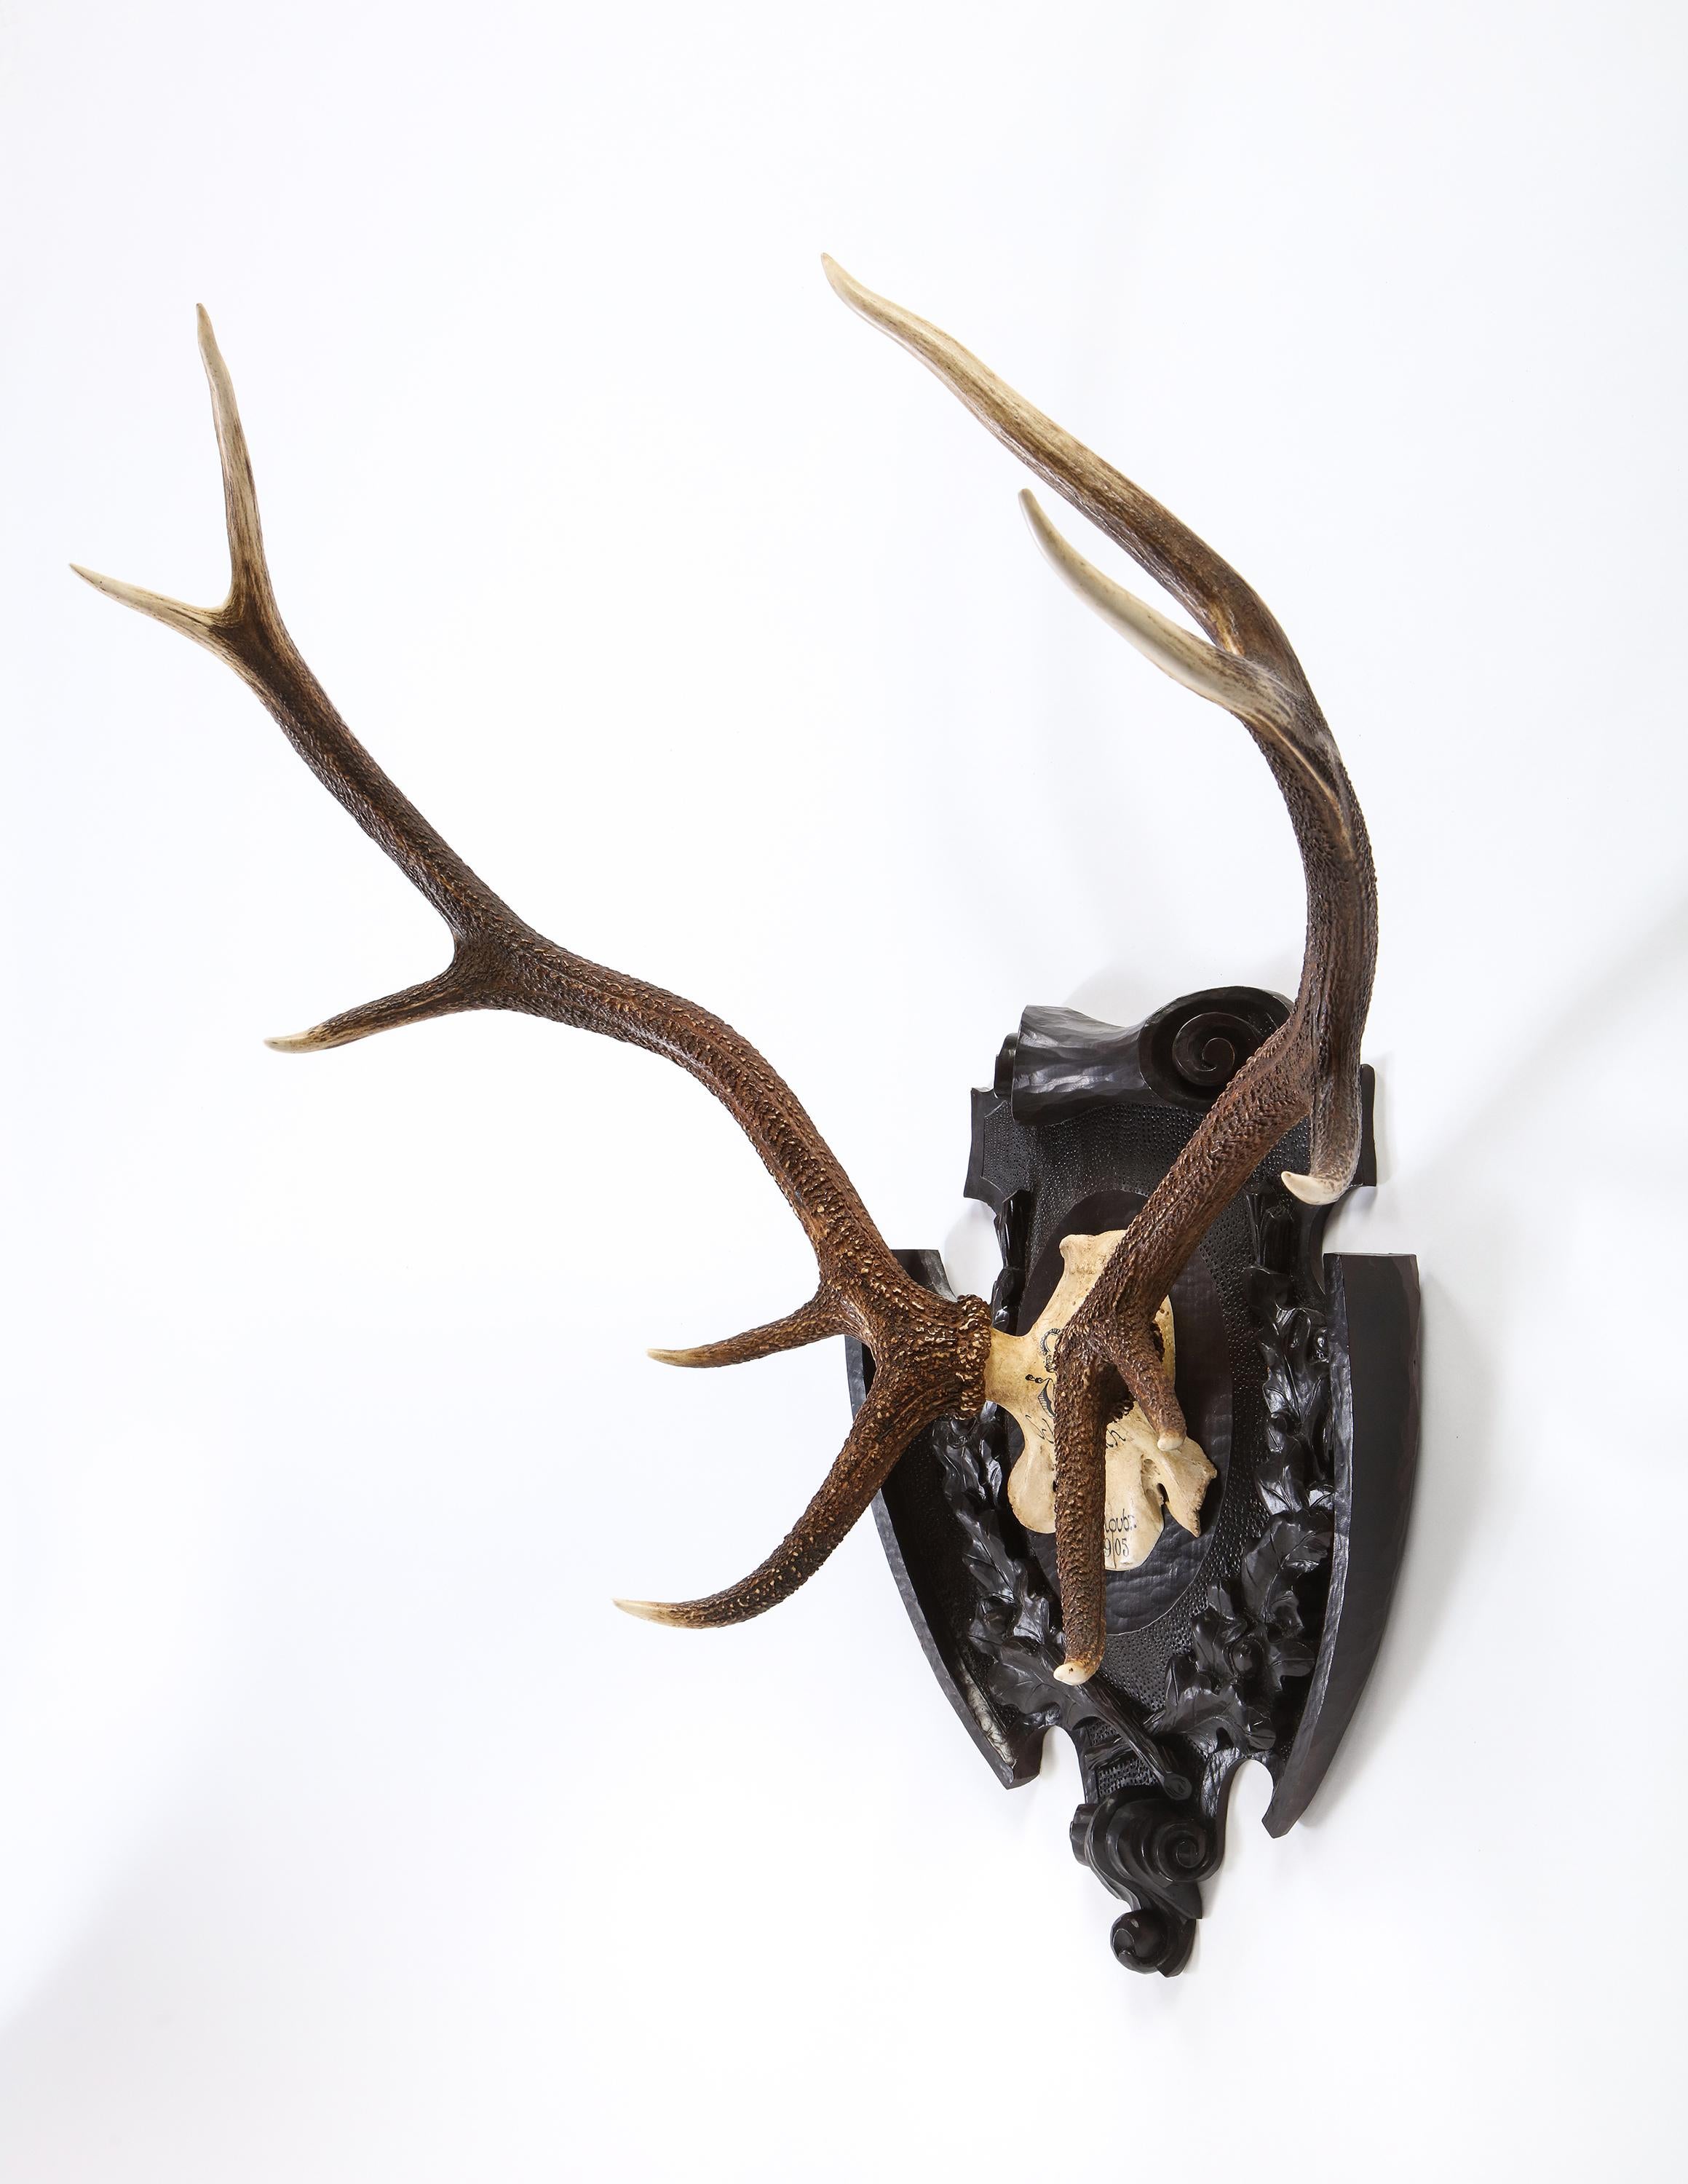 An impressive pair of Swiss ‘Black Forest’ antler carved trophy mounts, dated 1905 and 1906. These large antlers are mounted on carved wooden backplates. One is inscribed ‘Schonbuch 2.Novbr./1905,’, the other “Schonbuch 2.Novbr./1906”. Both skulls